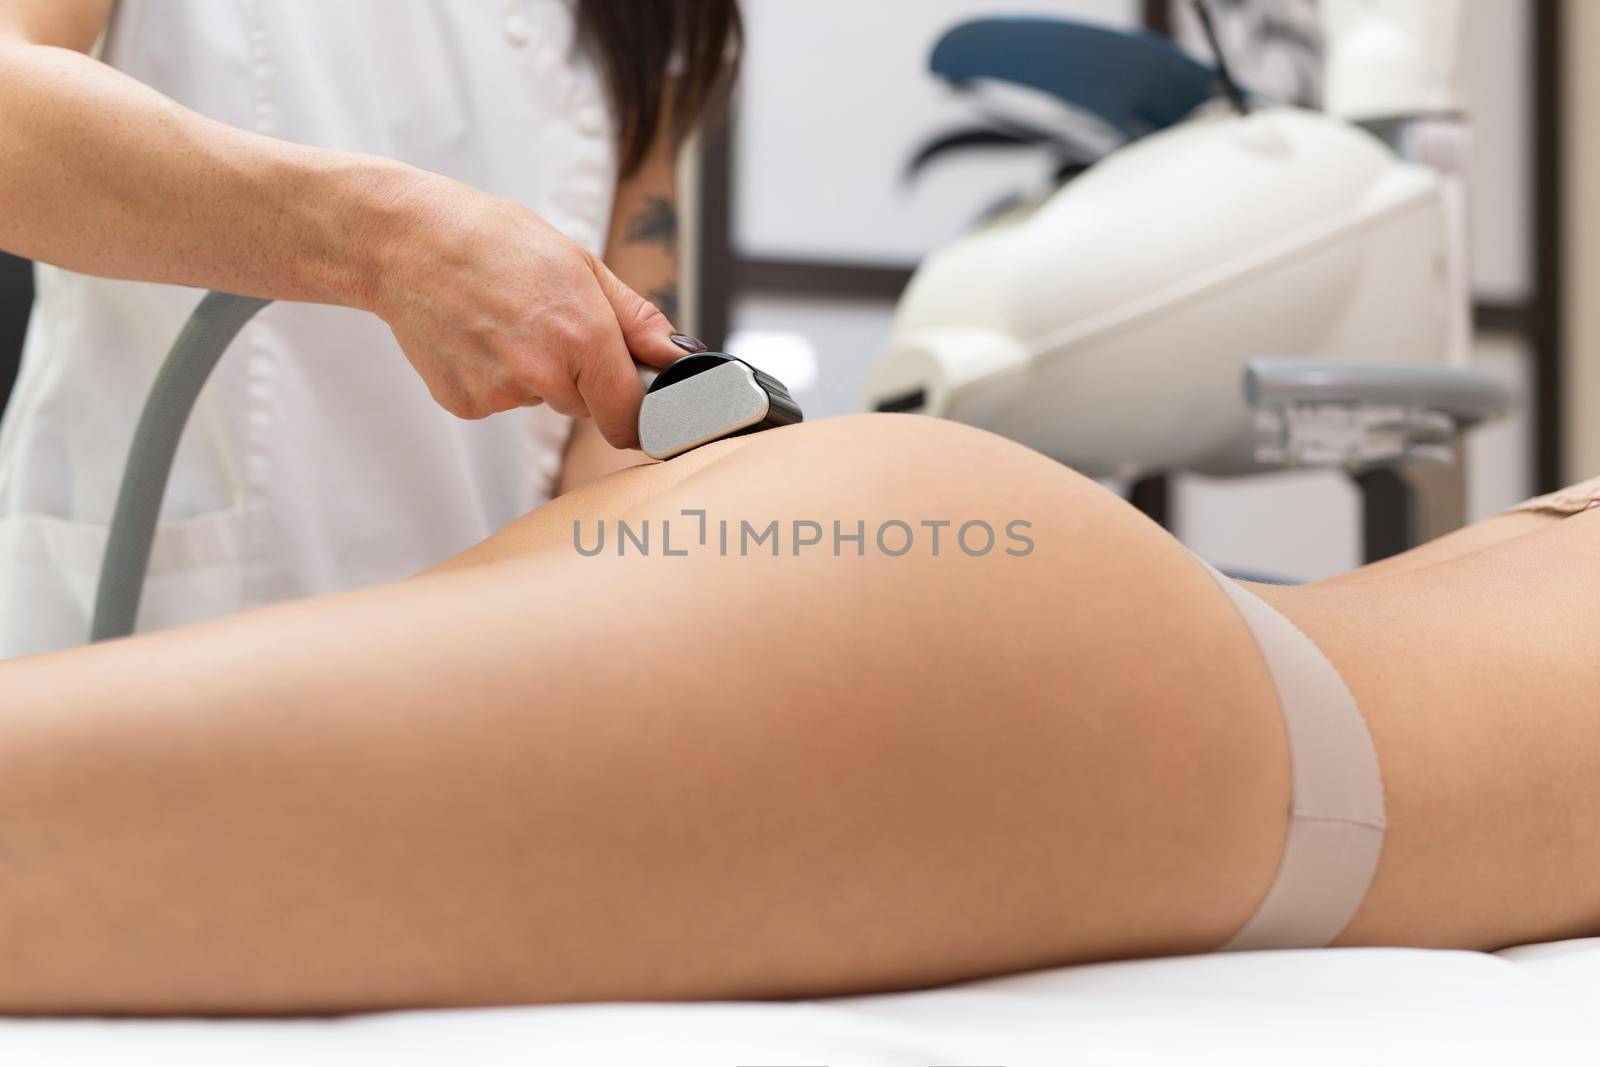 Close-up of a woman masseur doing a vacuum massage of the buttocks for a young woman. Cosmetology, body and skin care. Vacuum roller massage with the possibility of ultrasonic action.